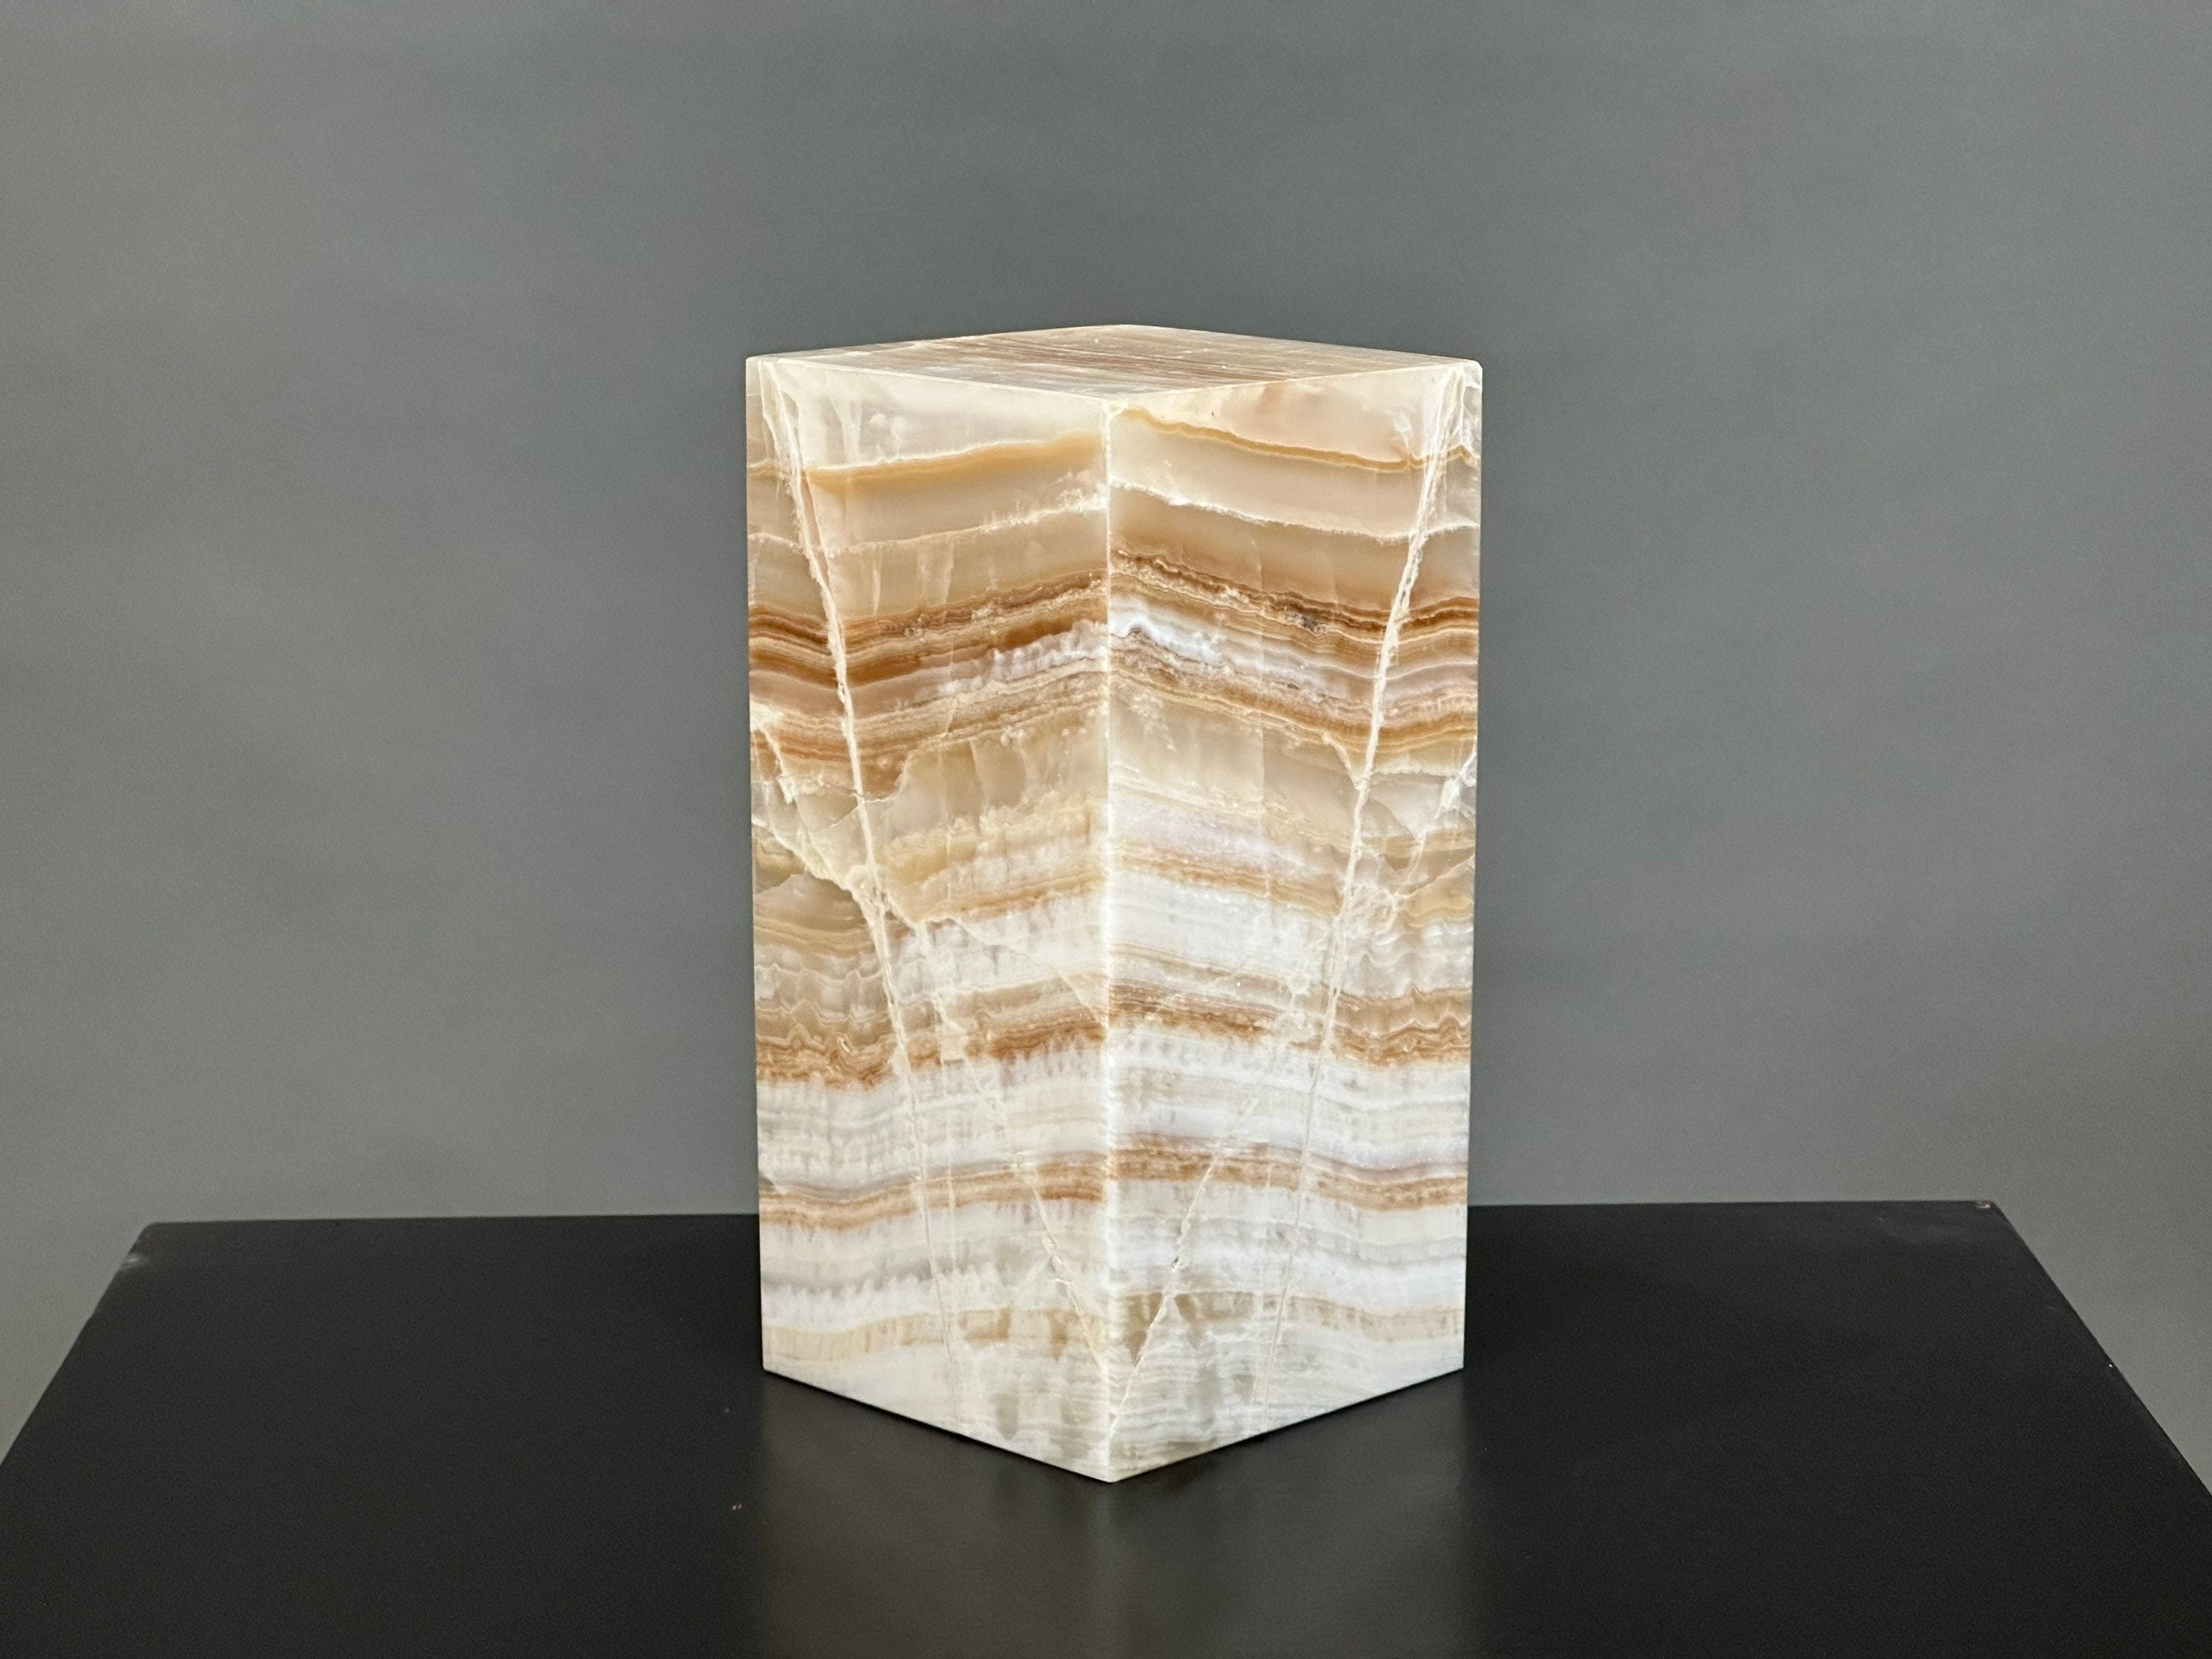 Genuine Square Banded Onyx Novelty Lamp from Mexico | Desk Lamp | Onyx Lamp | Lighting | Nightstand Lamp